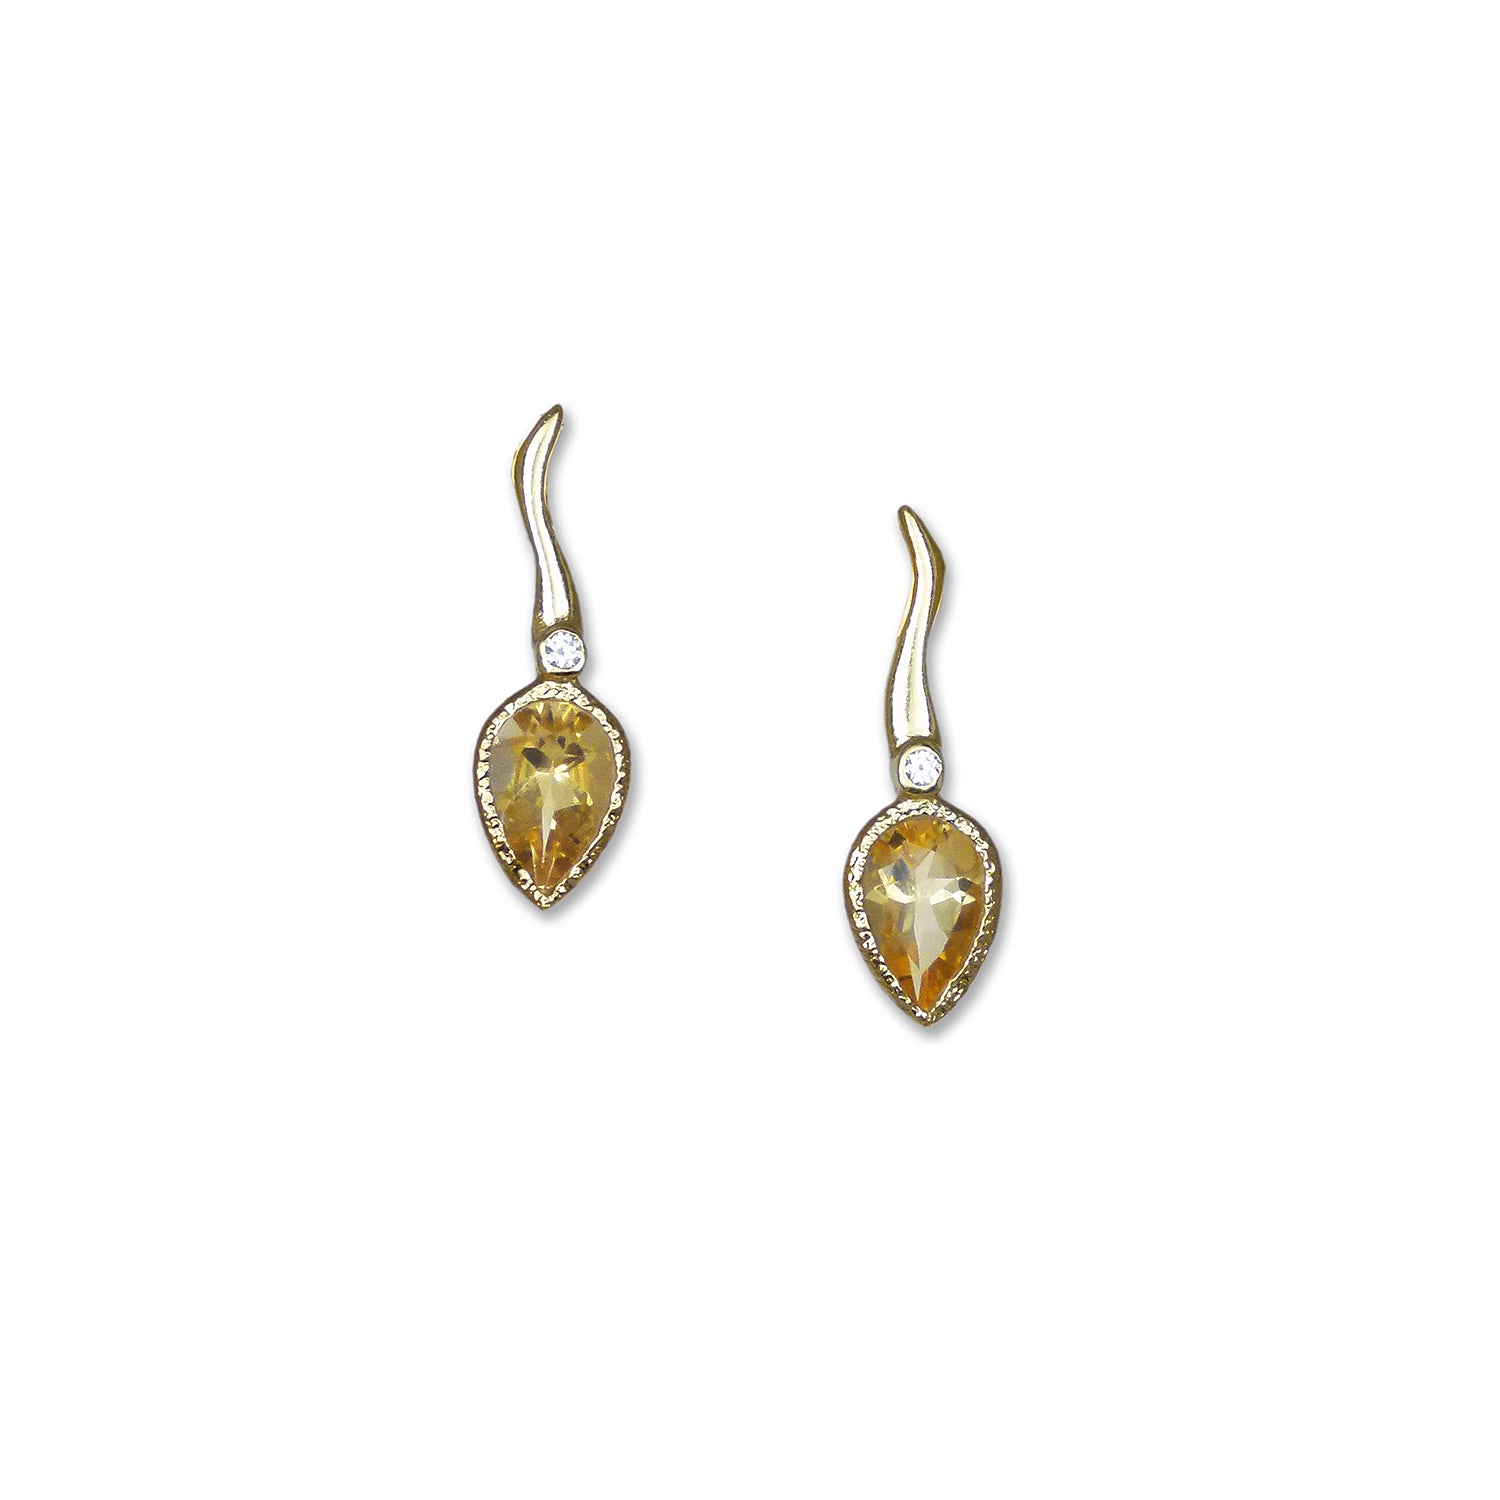 Gold Post Earrings in Citrine and Topaz